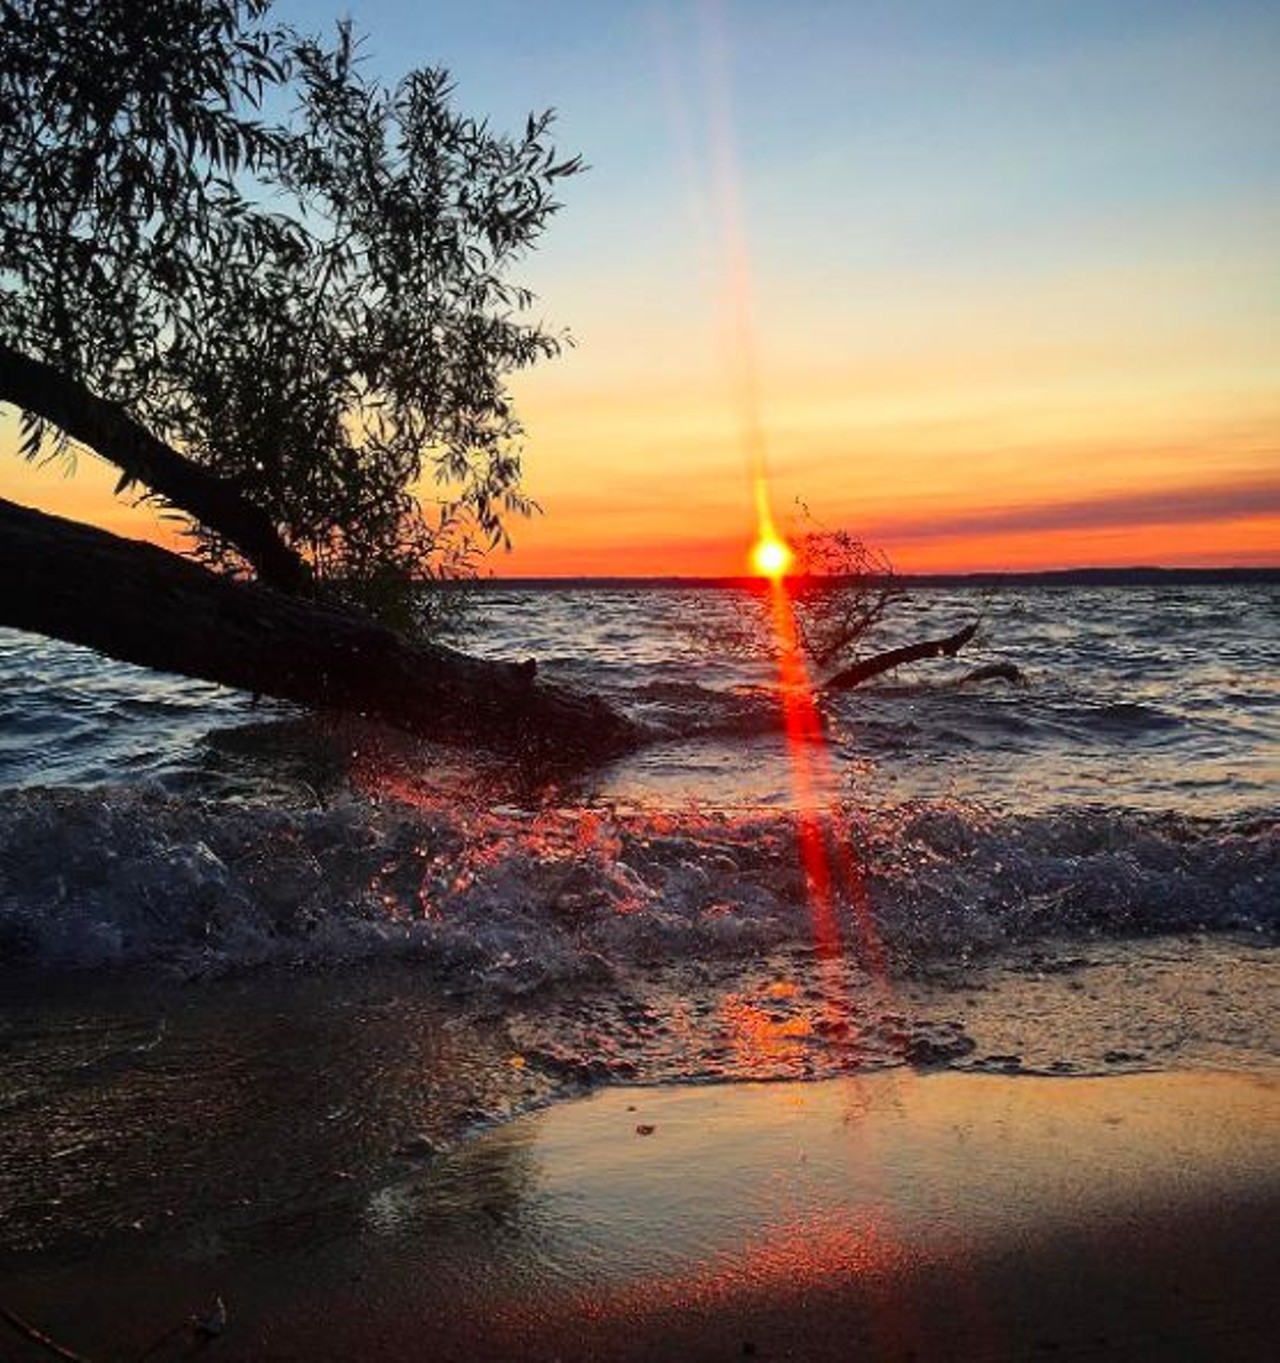 Aloha State Park
Cheboygan; 3 hours, 55 minutes
Aloha&#146;s beach has all the charm of a classic state park, minus the chaos and crowds. The park also contains a whopping 285 modern campsites. Camp reservation is encouraged.
Photo via IG user @megaltizer16